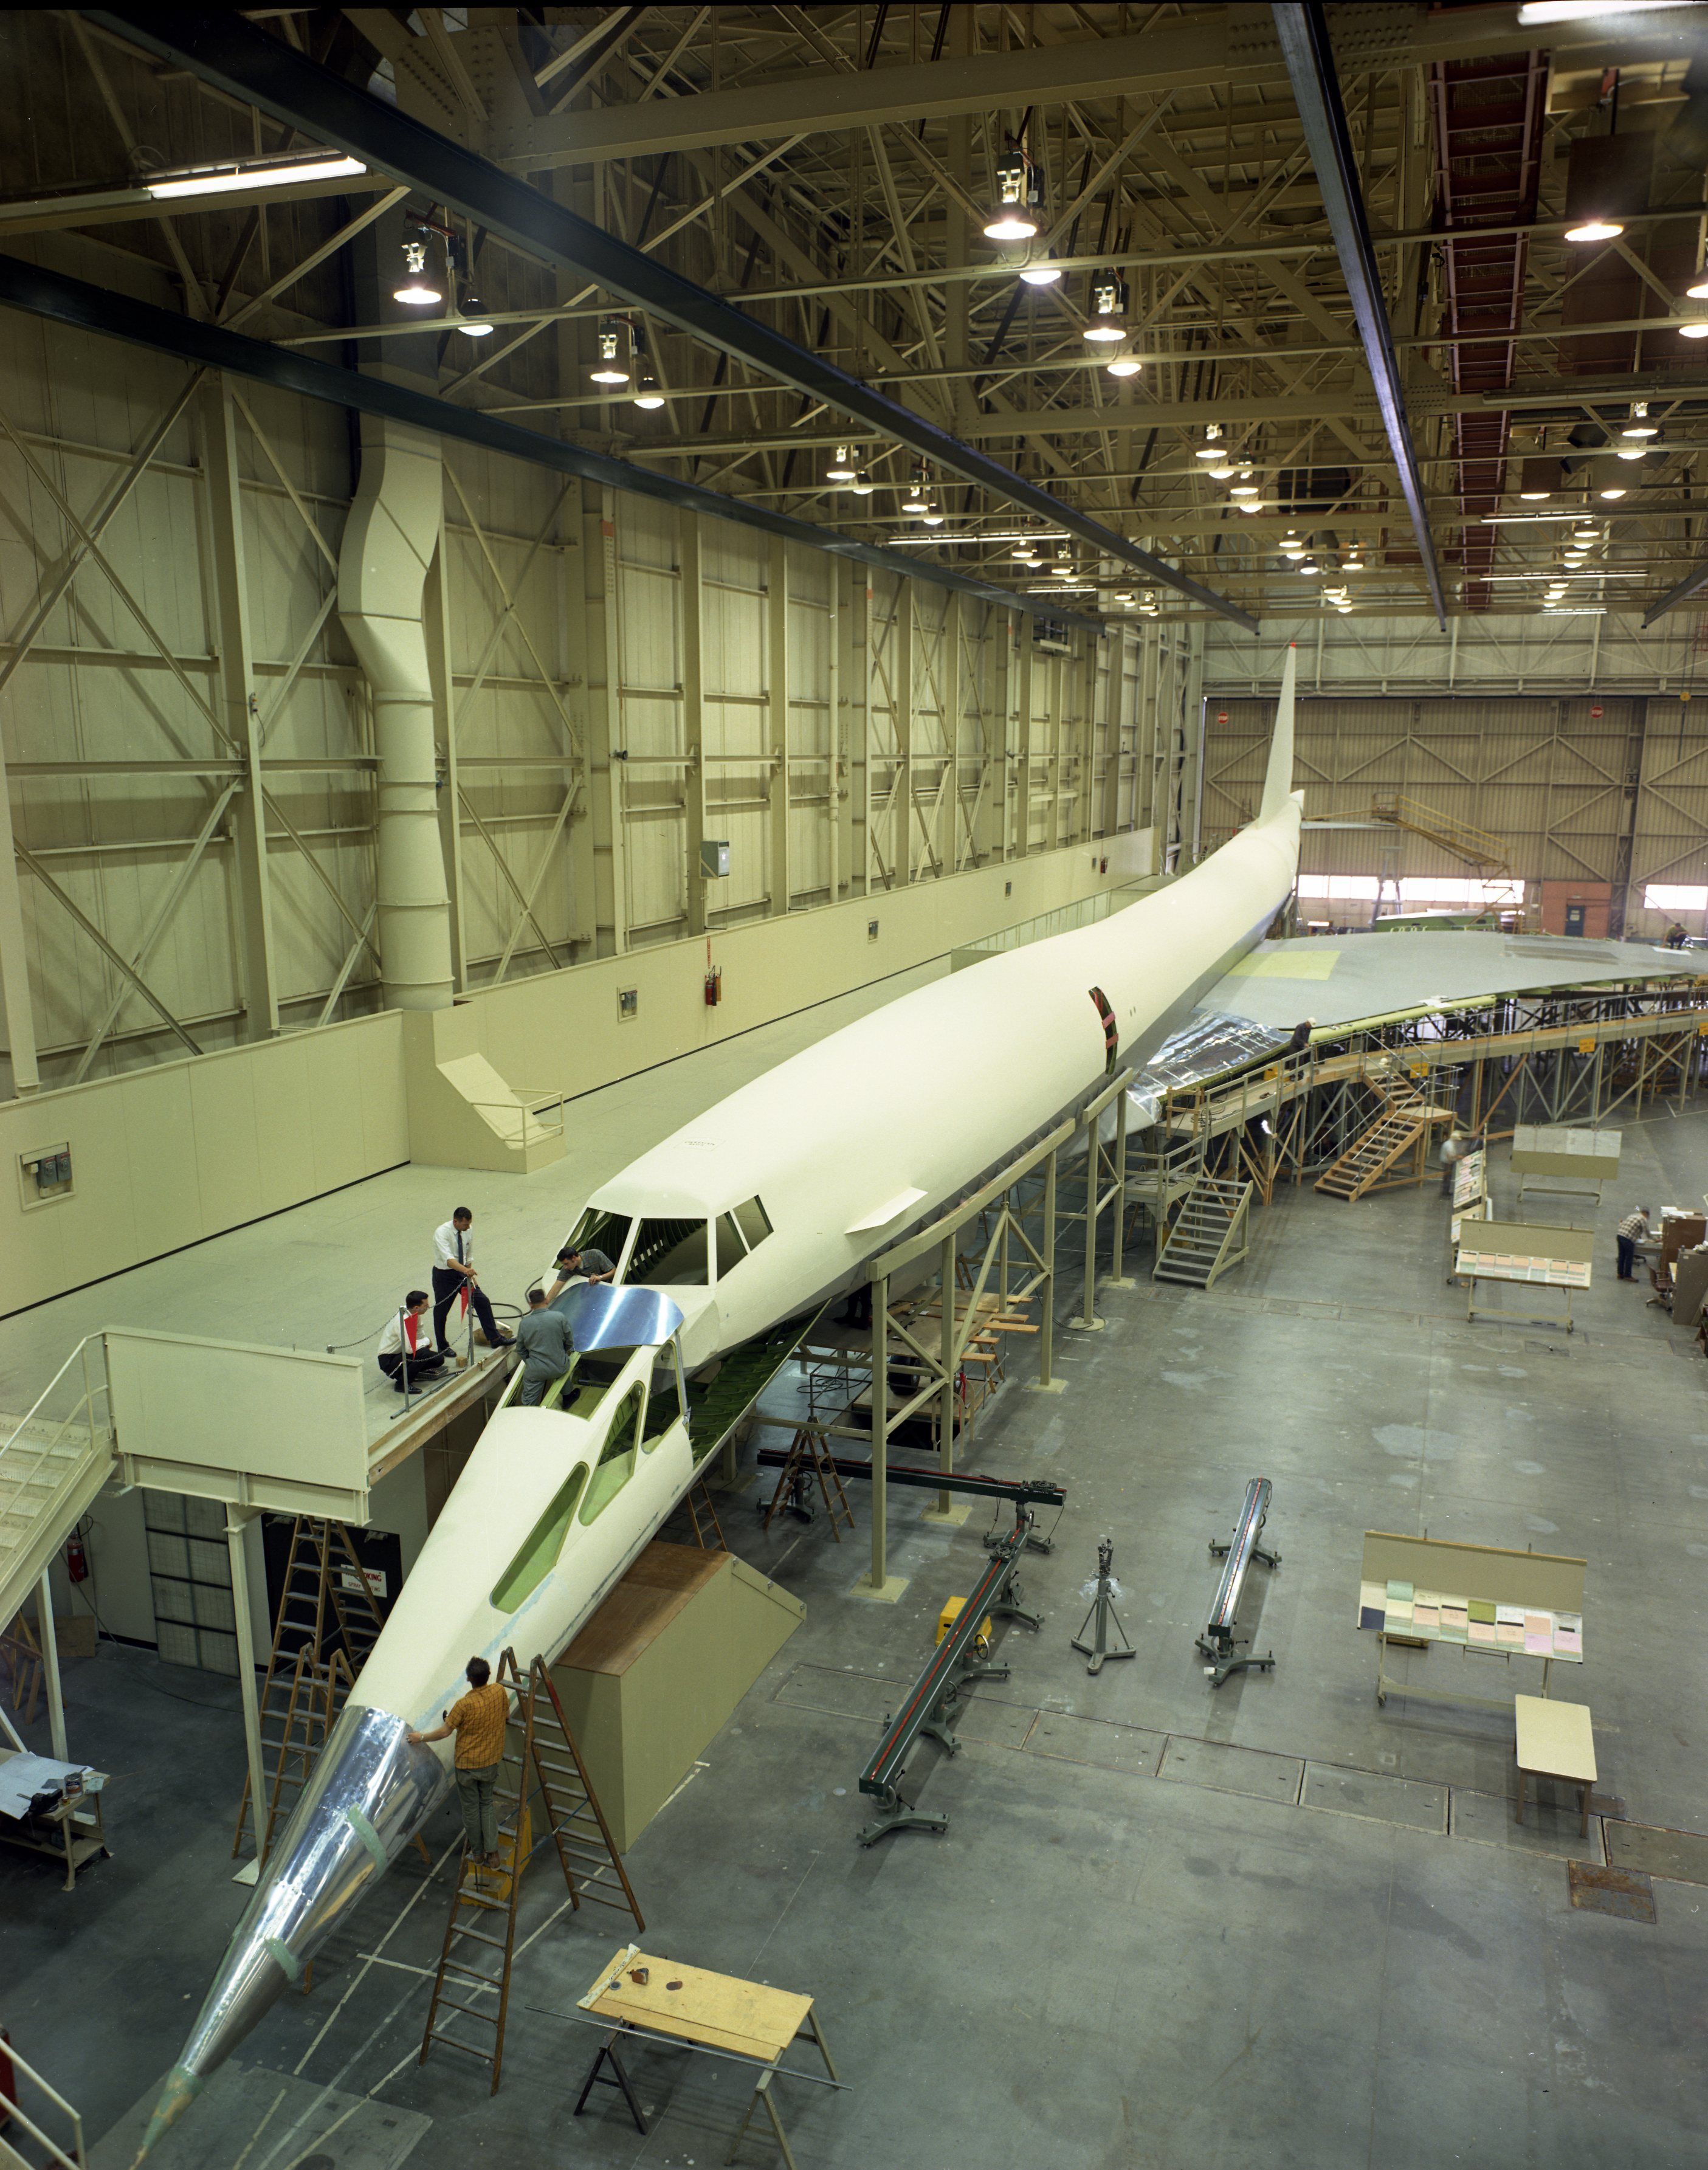 Boeing 2707 Mockup Pictured Under Construction